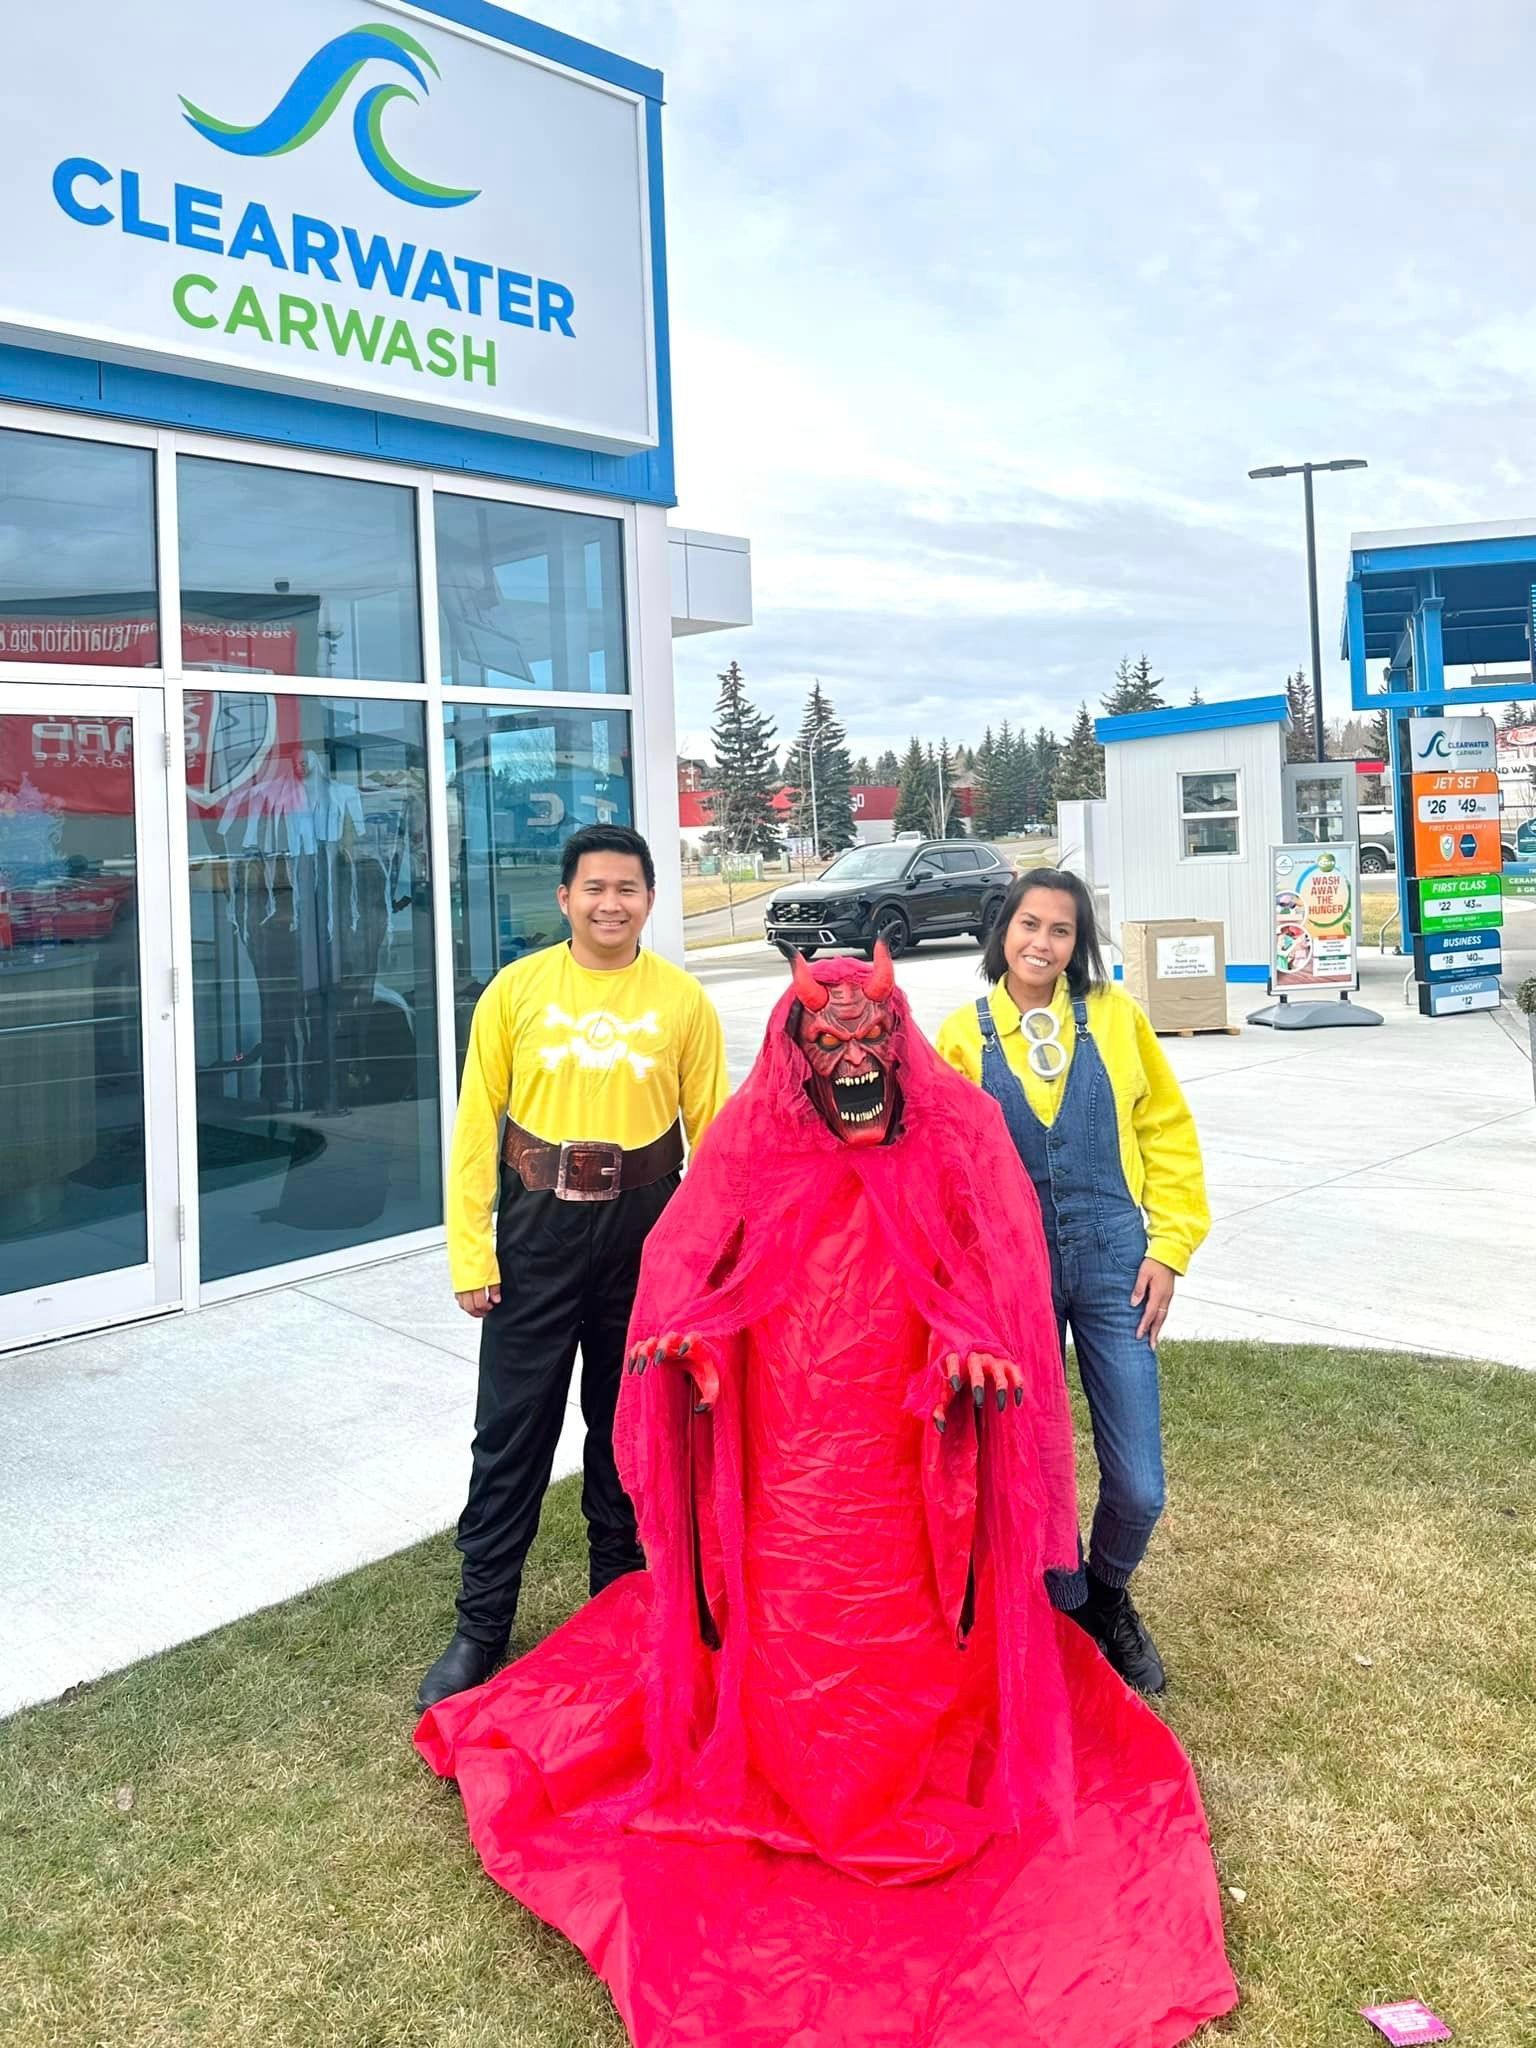 ClearWater staff pose with someone in a devil costume